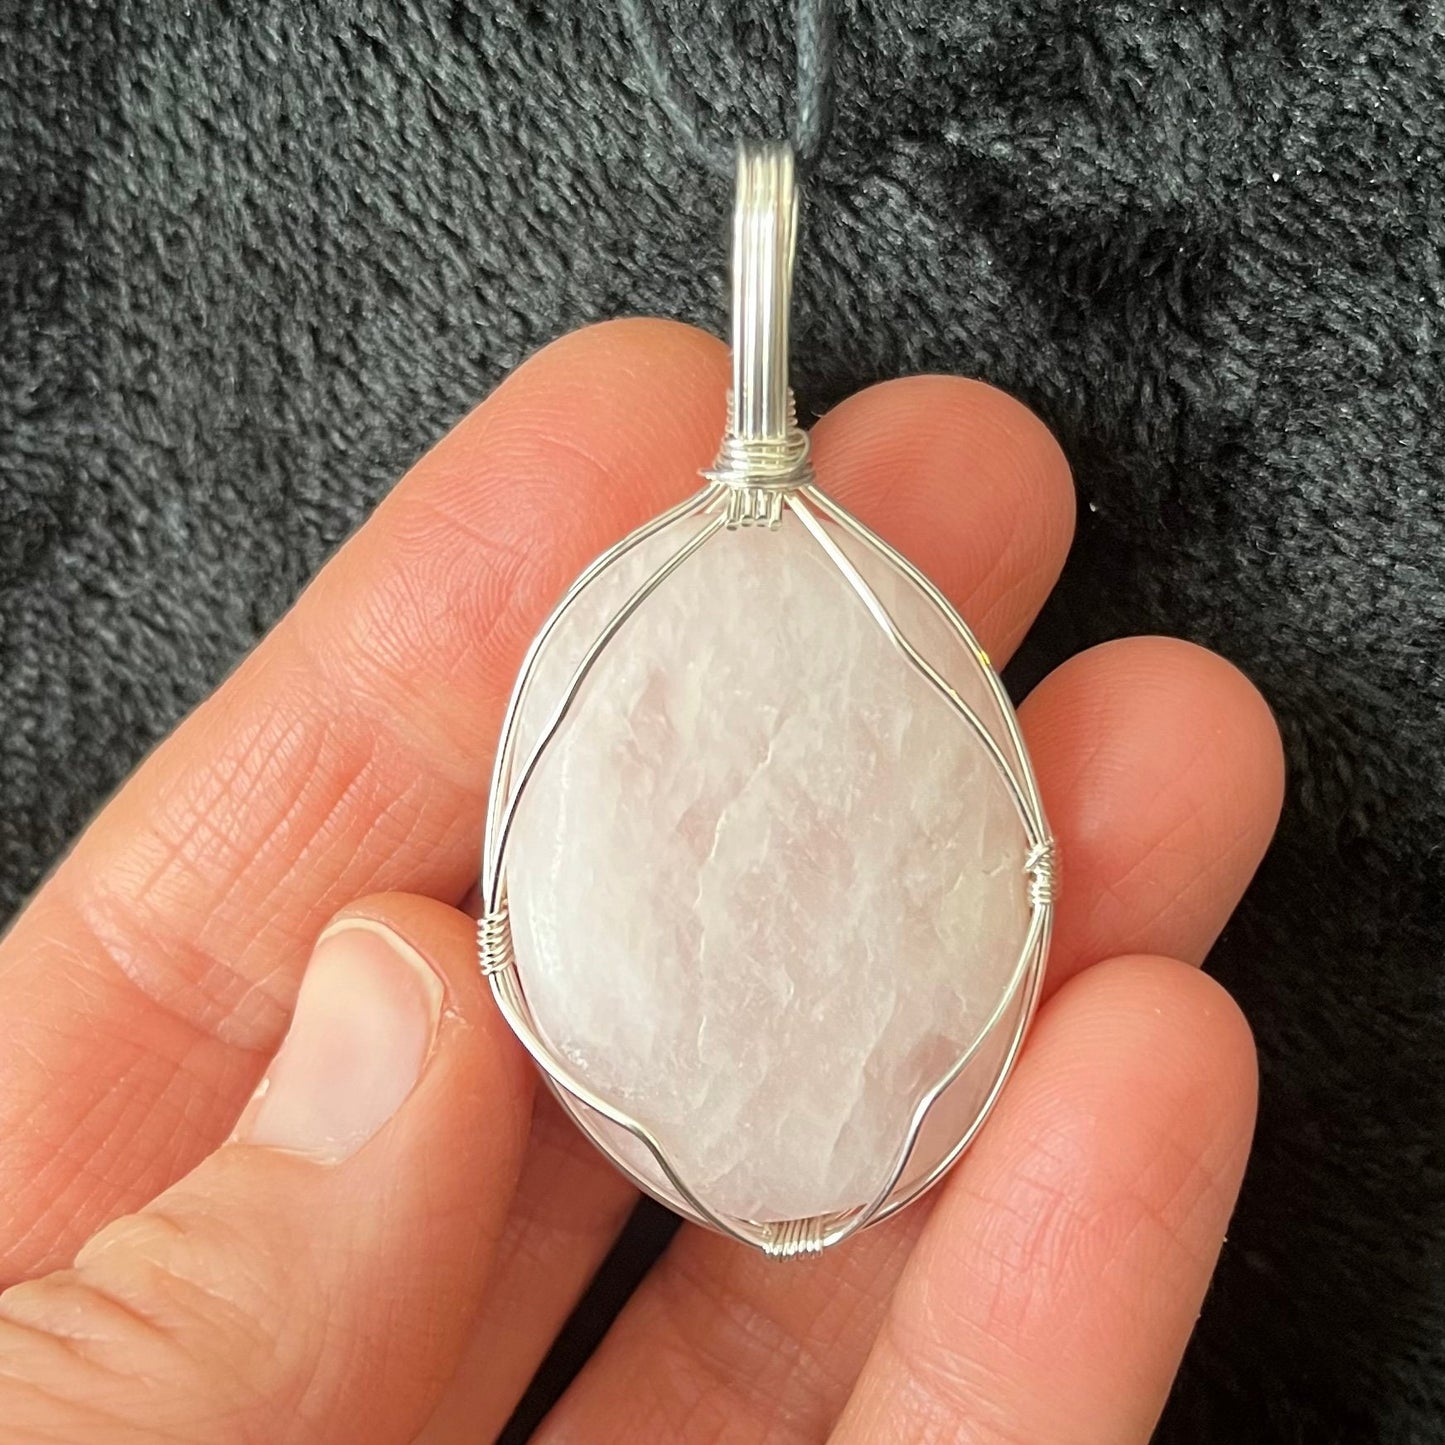  silver wire wrapped with a an or ate and delicate frame, this translucent pink rose quartz worry stone pendant is approximately 1 1/2" long and, attarched to an adjustable black cord.  